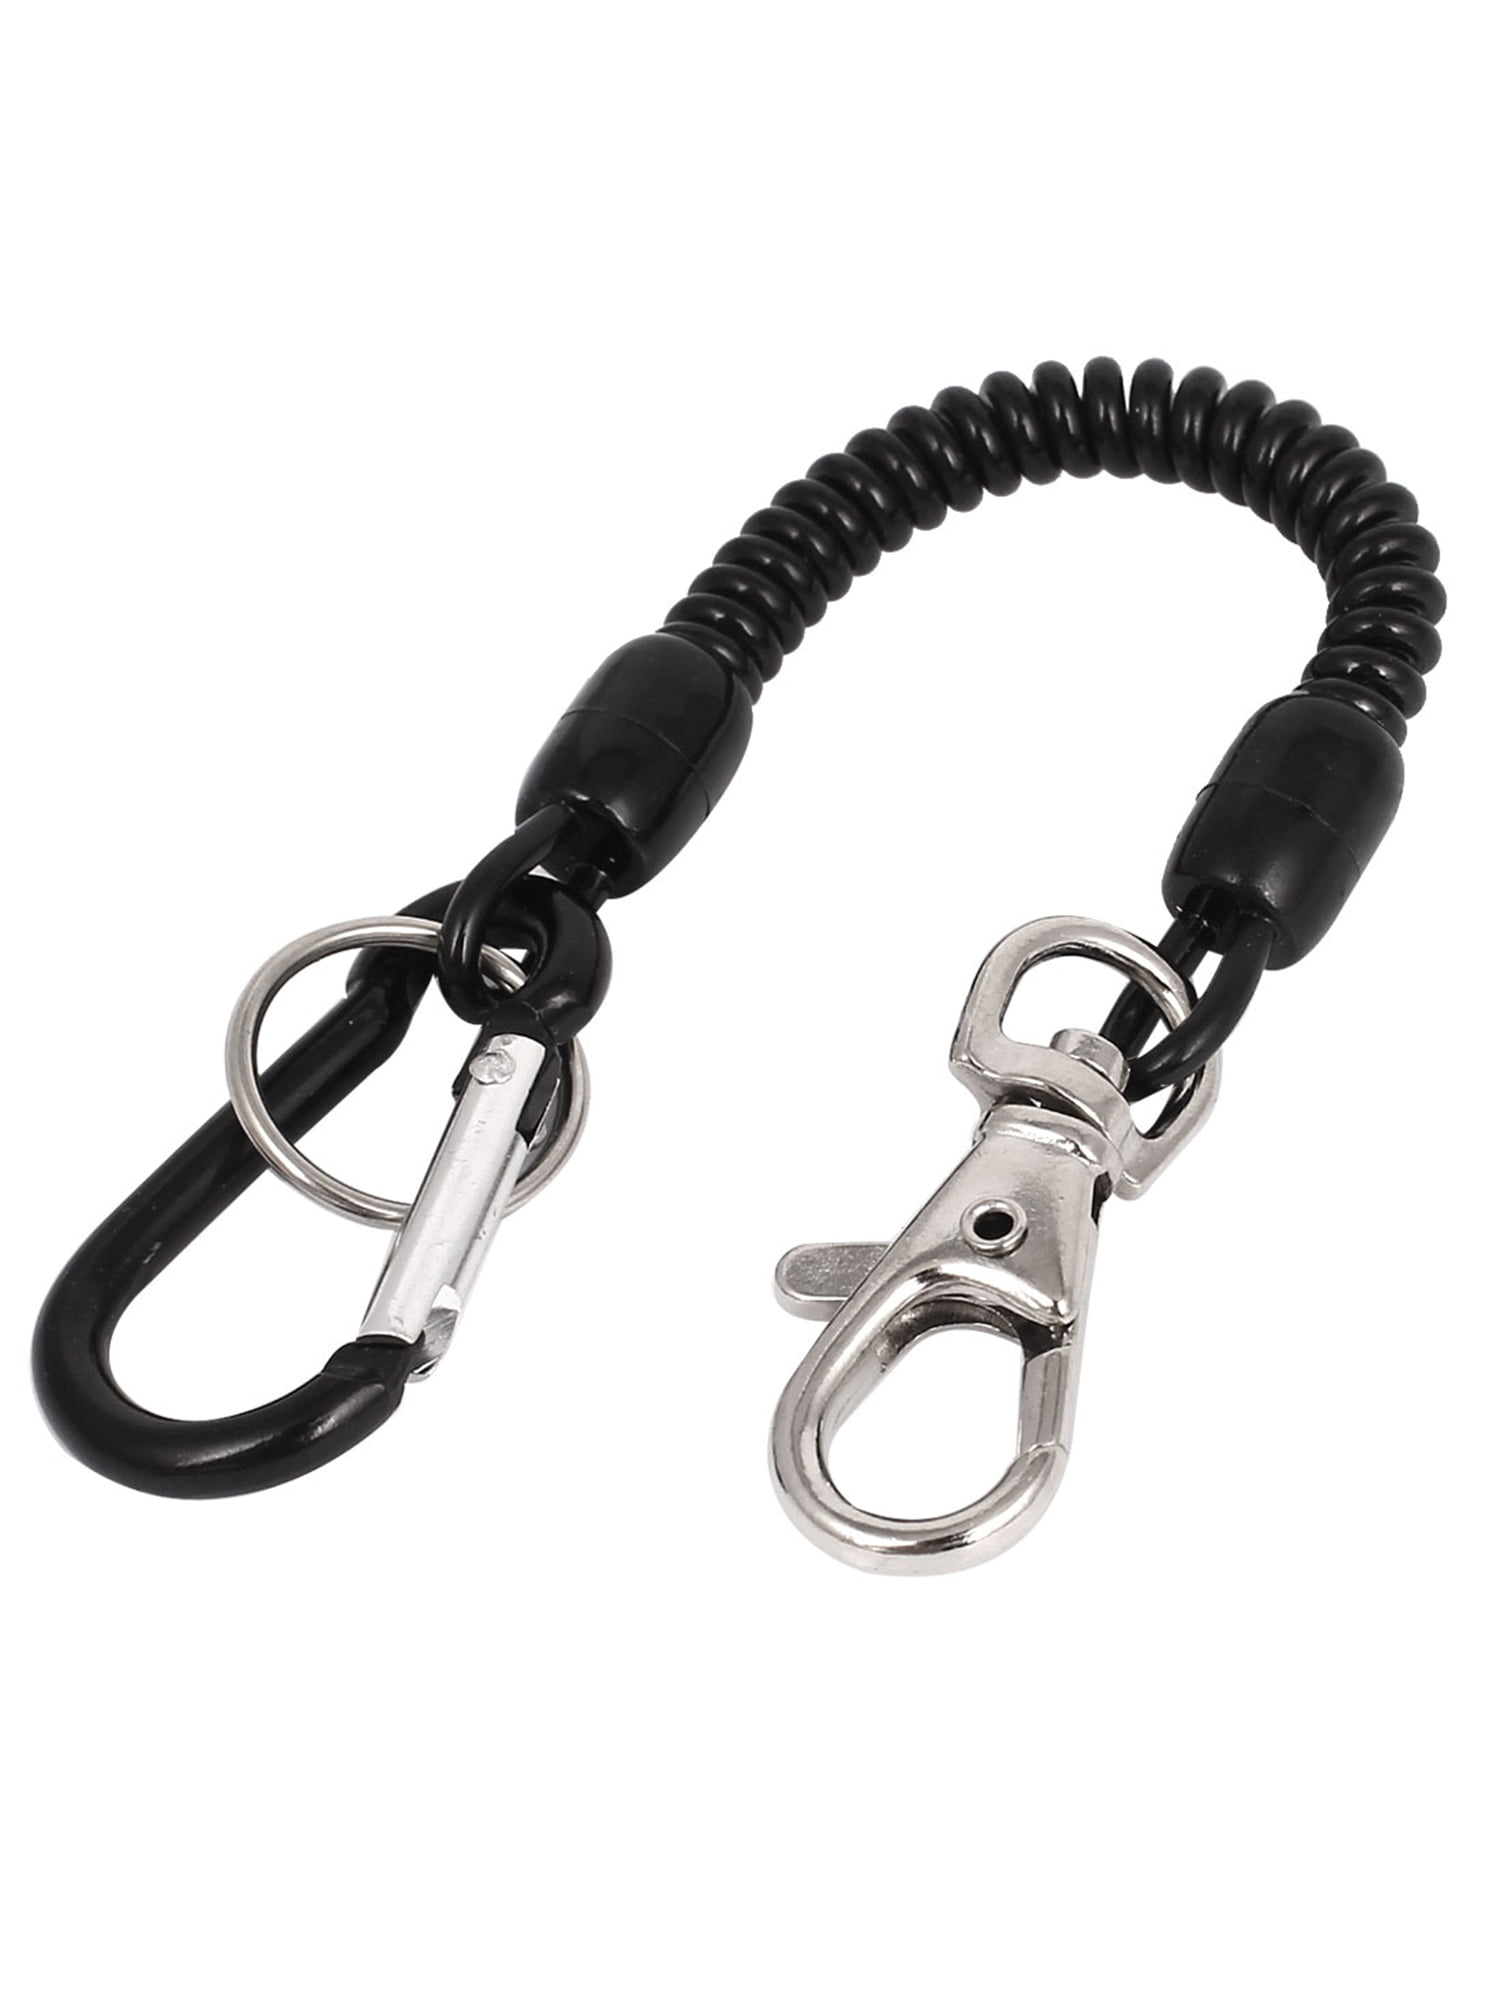 Details about   5X Spring SF Hooks Carabiner Key Chain Clip Hook Outdoor Buckle EDC Small .J 